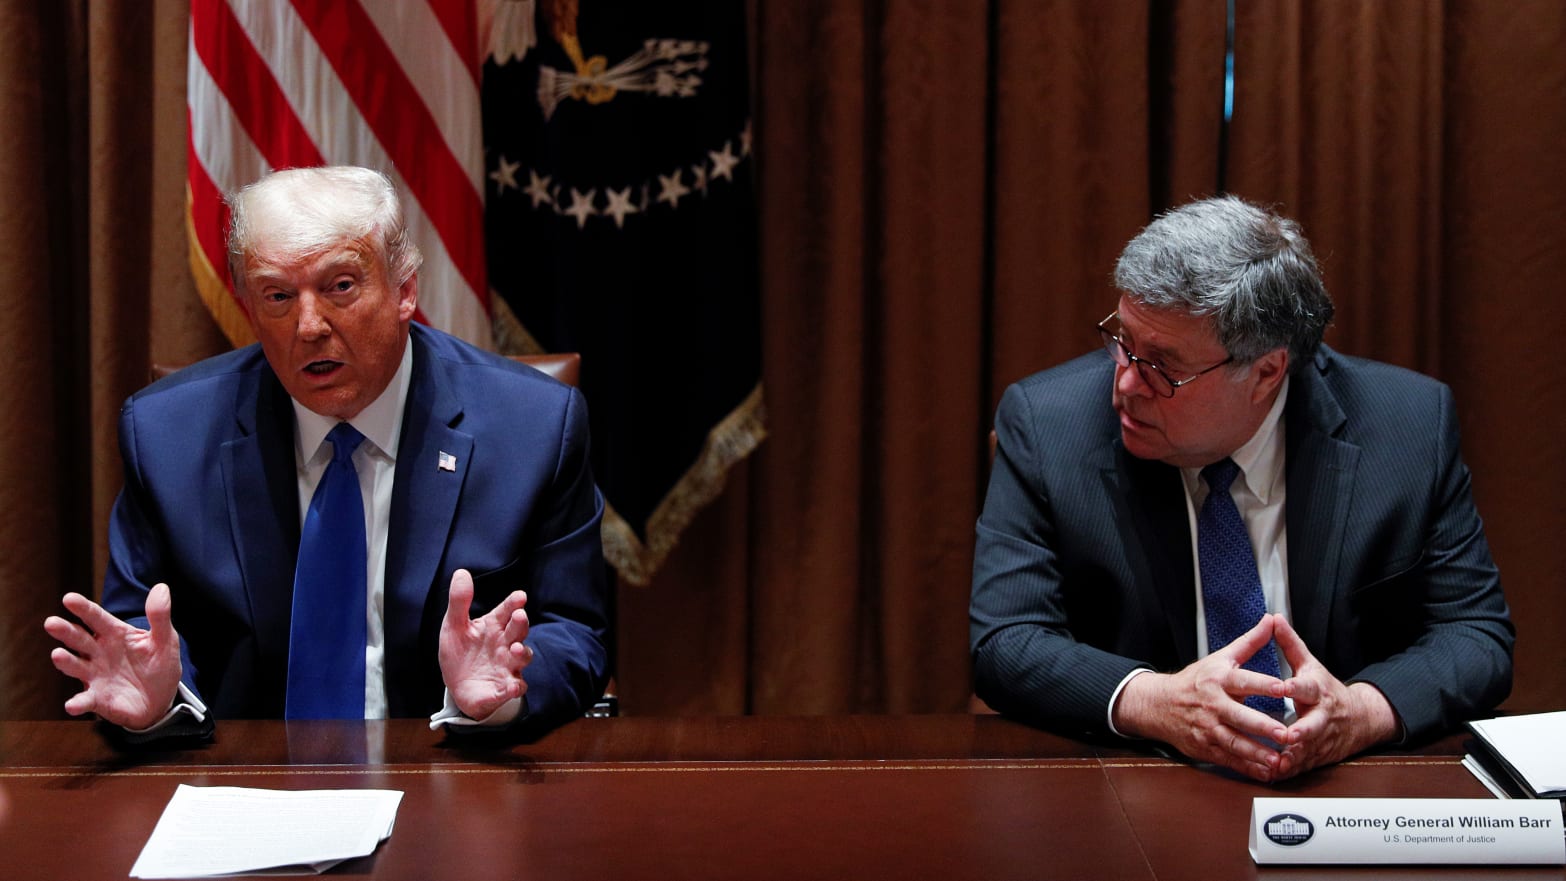 U.S. President Donald Trump speaks next to U.S. Attorney General Bill Barr during a discussion with state attorneys general on social media abuses in the Cabinet Room at the White House in Washington, D.C., Sept. 23, 2020.